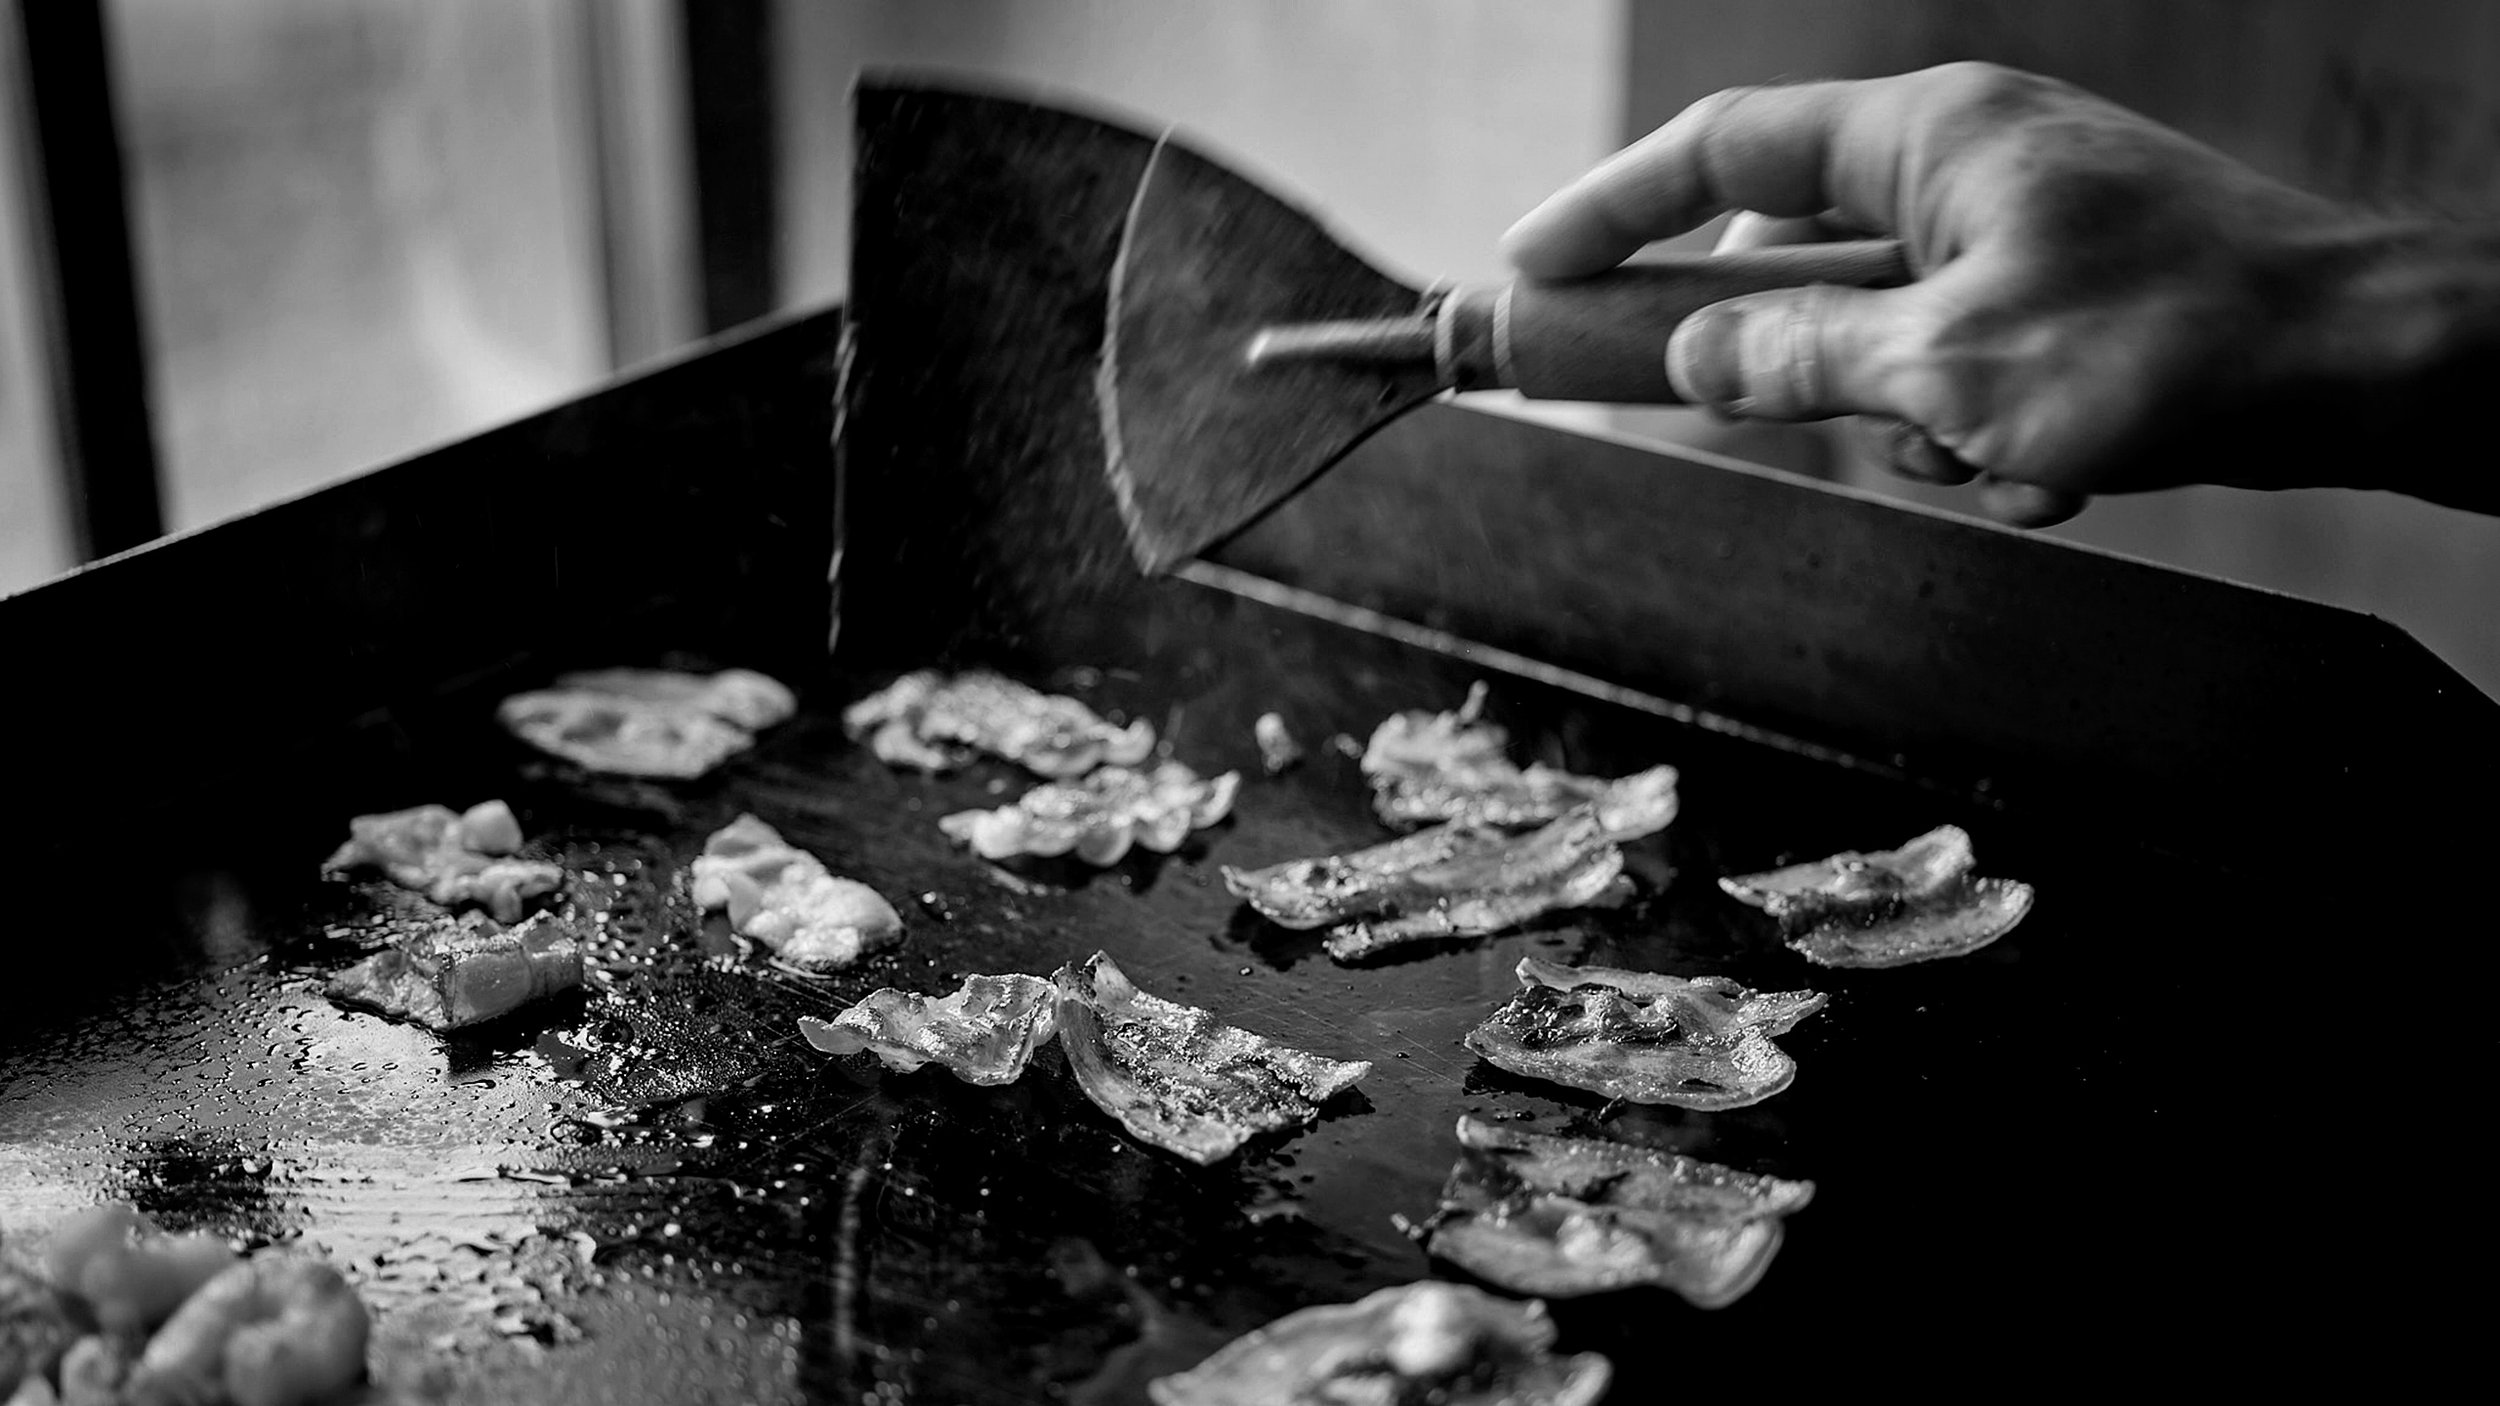 Catering_Food_01_Bacon_2560x1440 _ BW.jpg